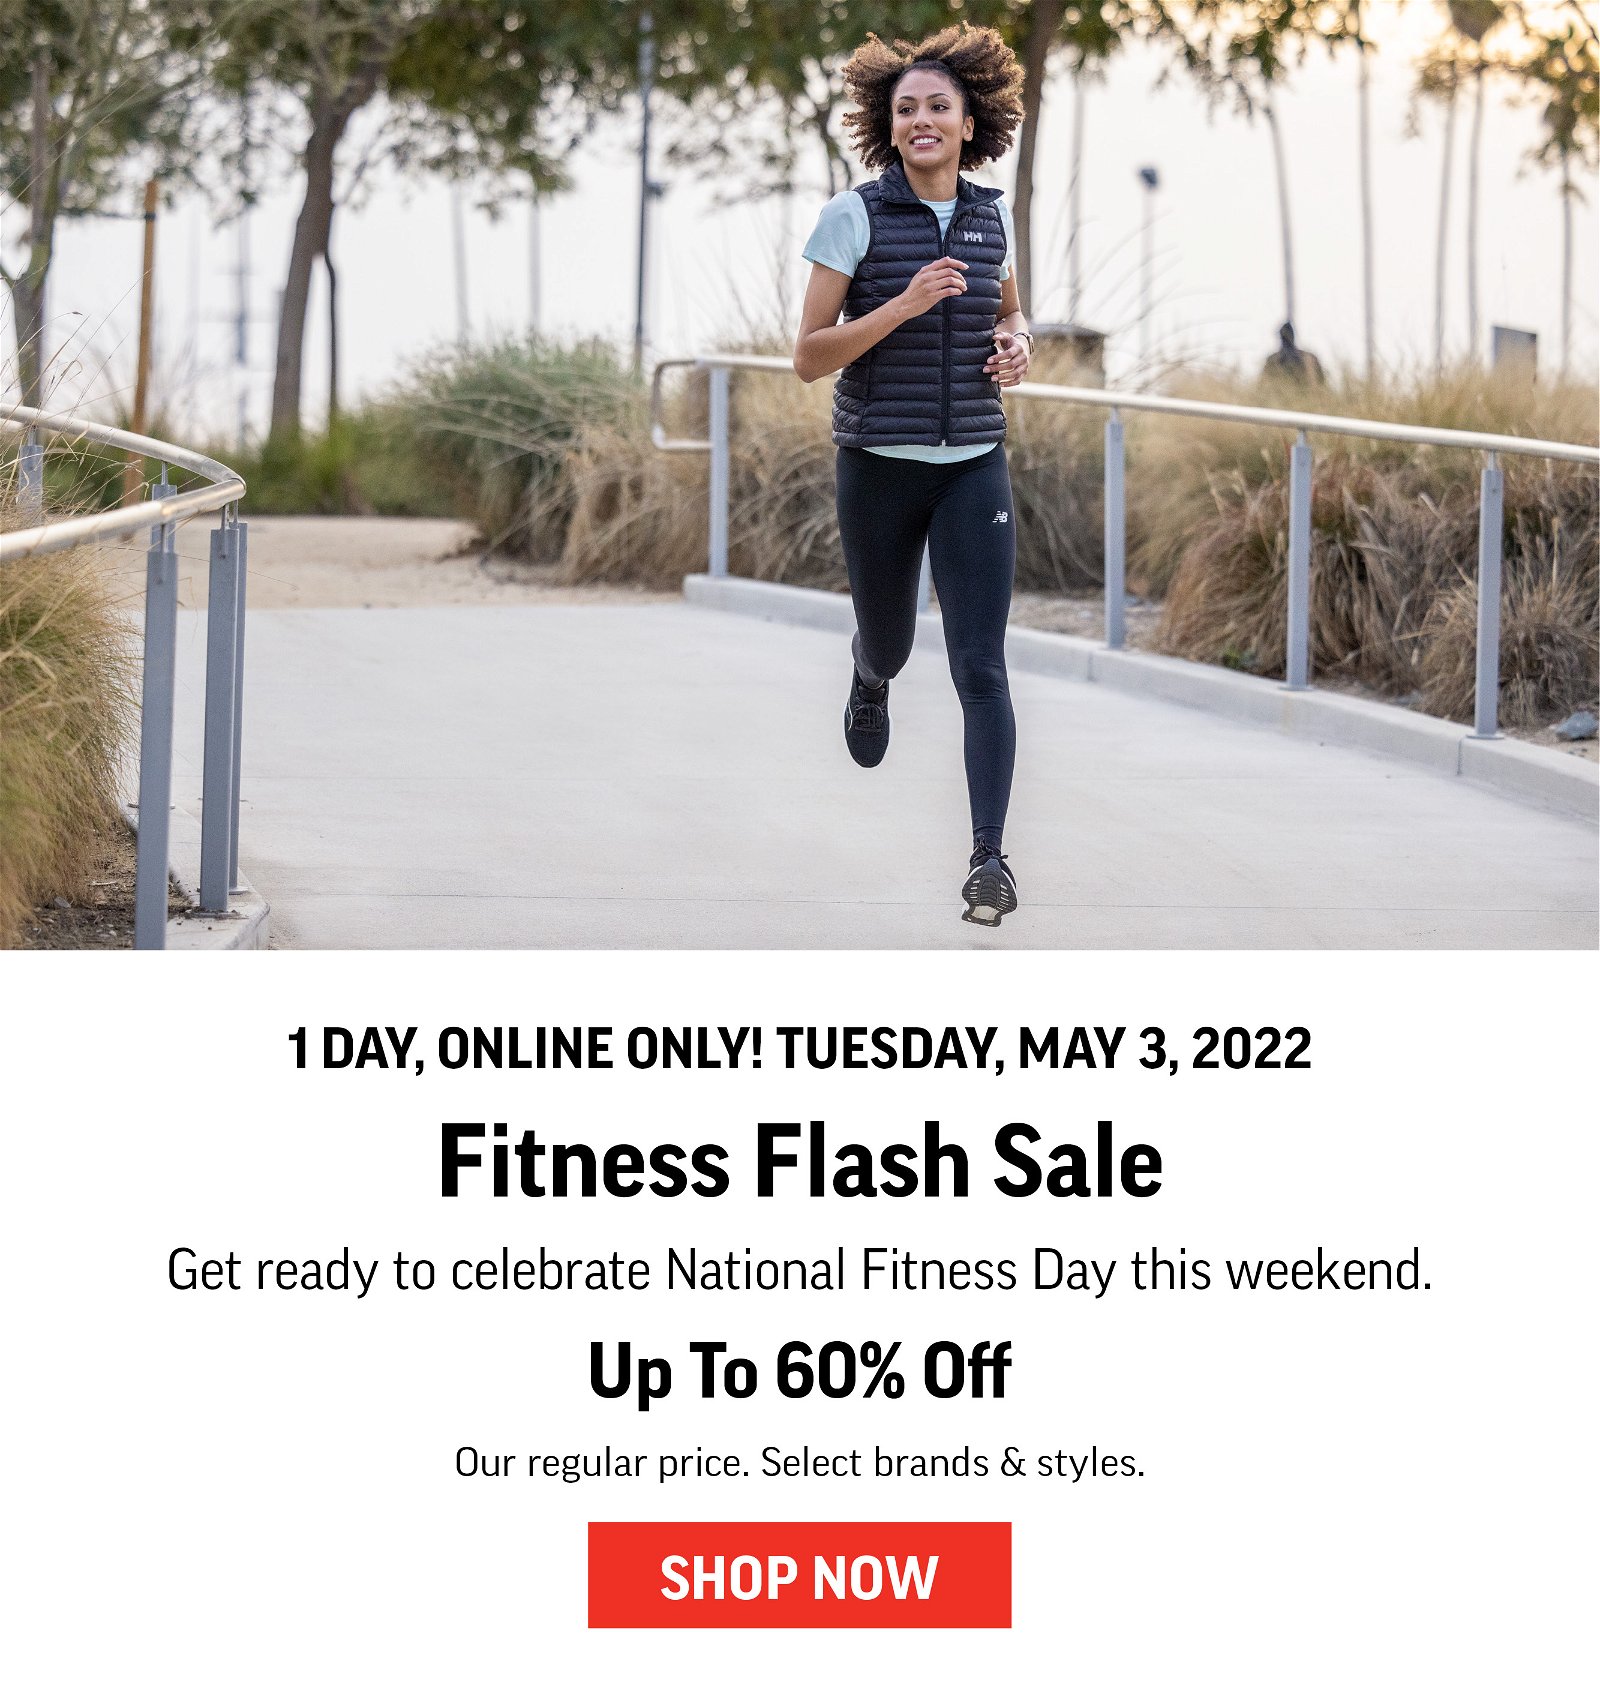 1 DAY, ONLINE ONLY!  WEDNESDAY, MAY 4, 2022. FLASH SALE UP TO 60% OFF